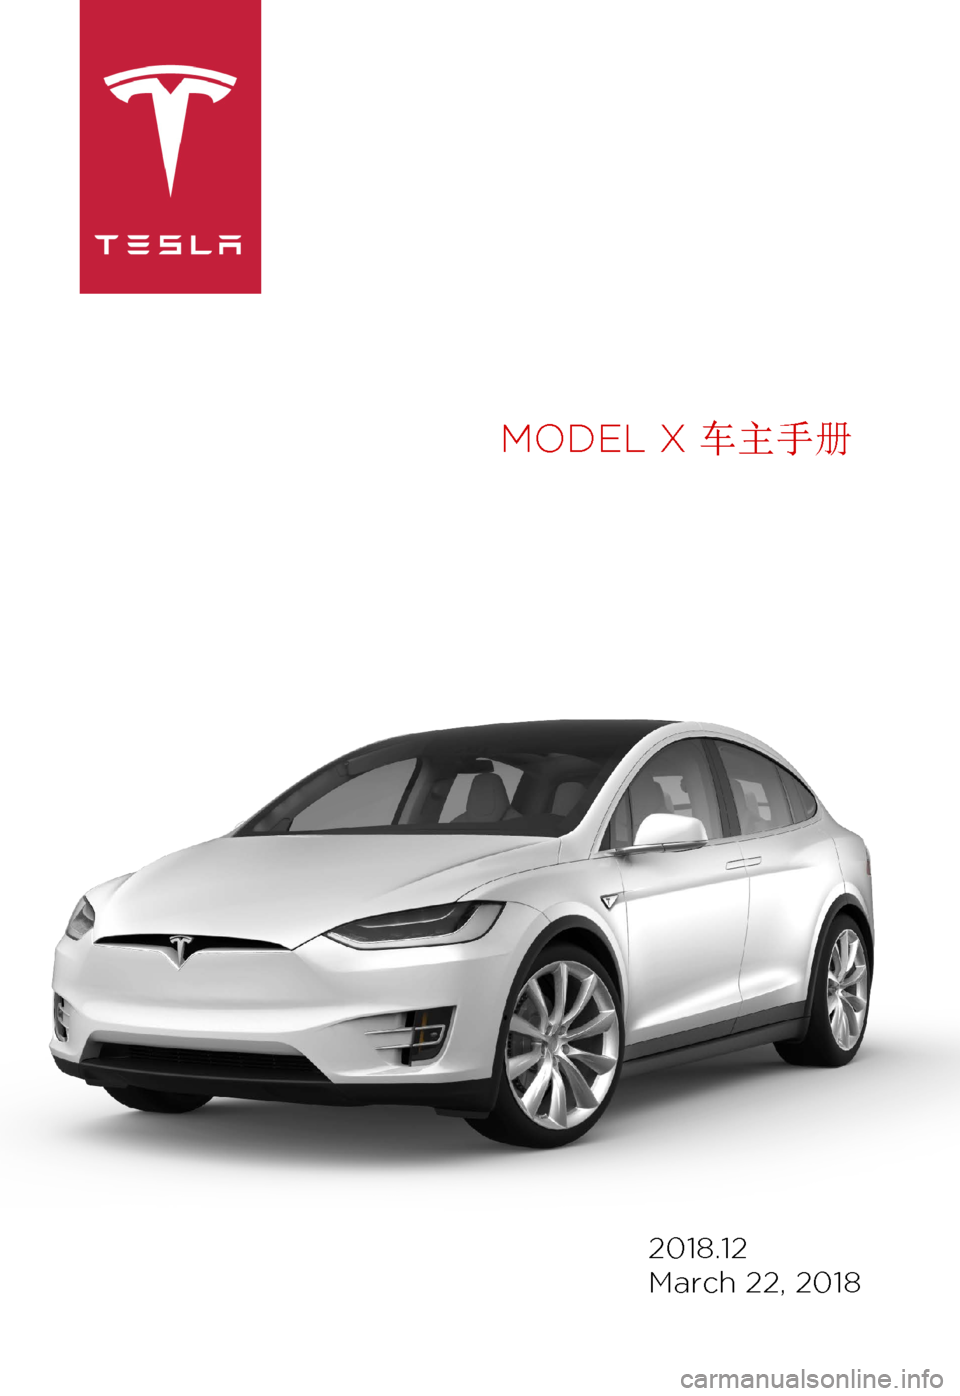 TESLA MODEL X 2018  車主手冊 (in Chinese Traditional) MODEL
 X  车主手册 2018.1
2 
M arch 
22, 2018 